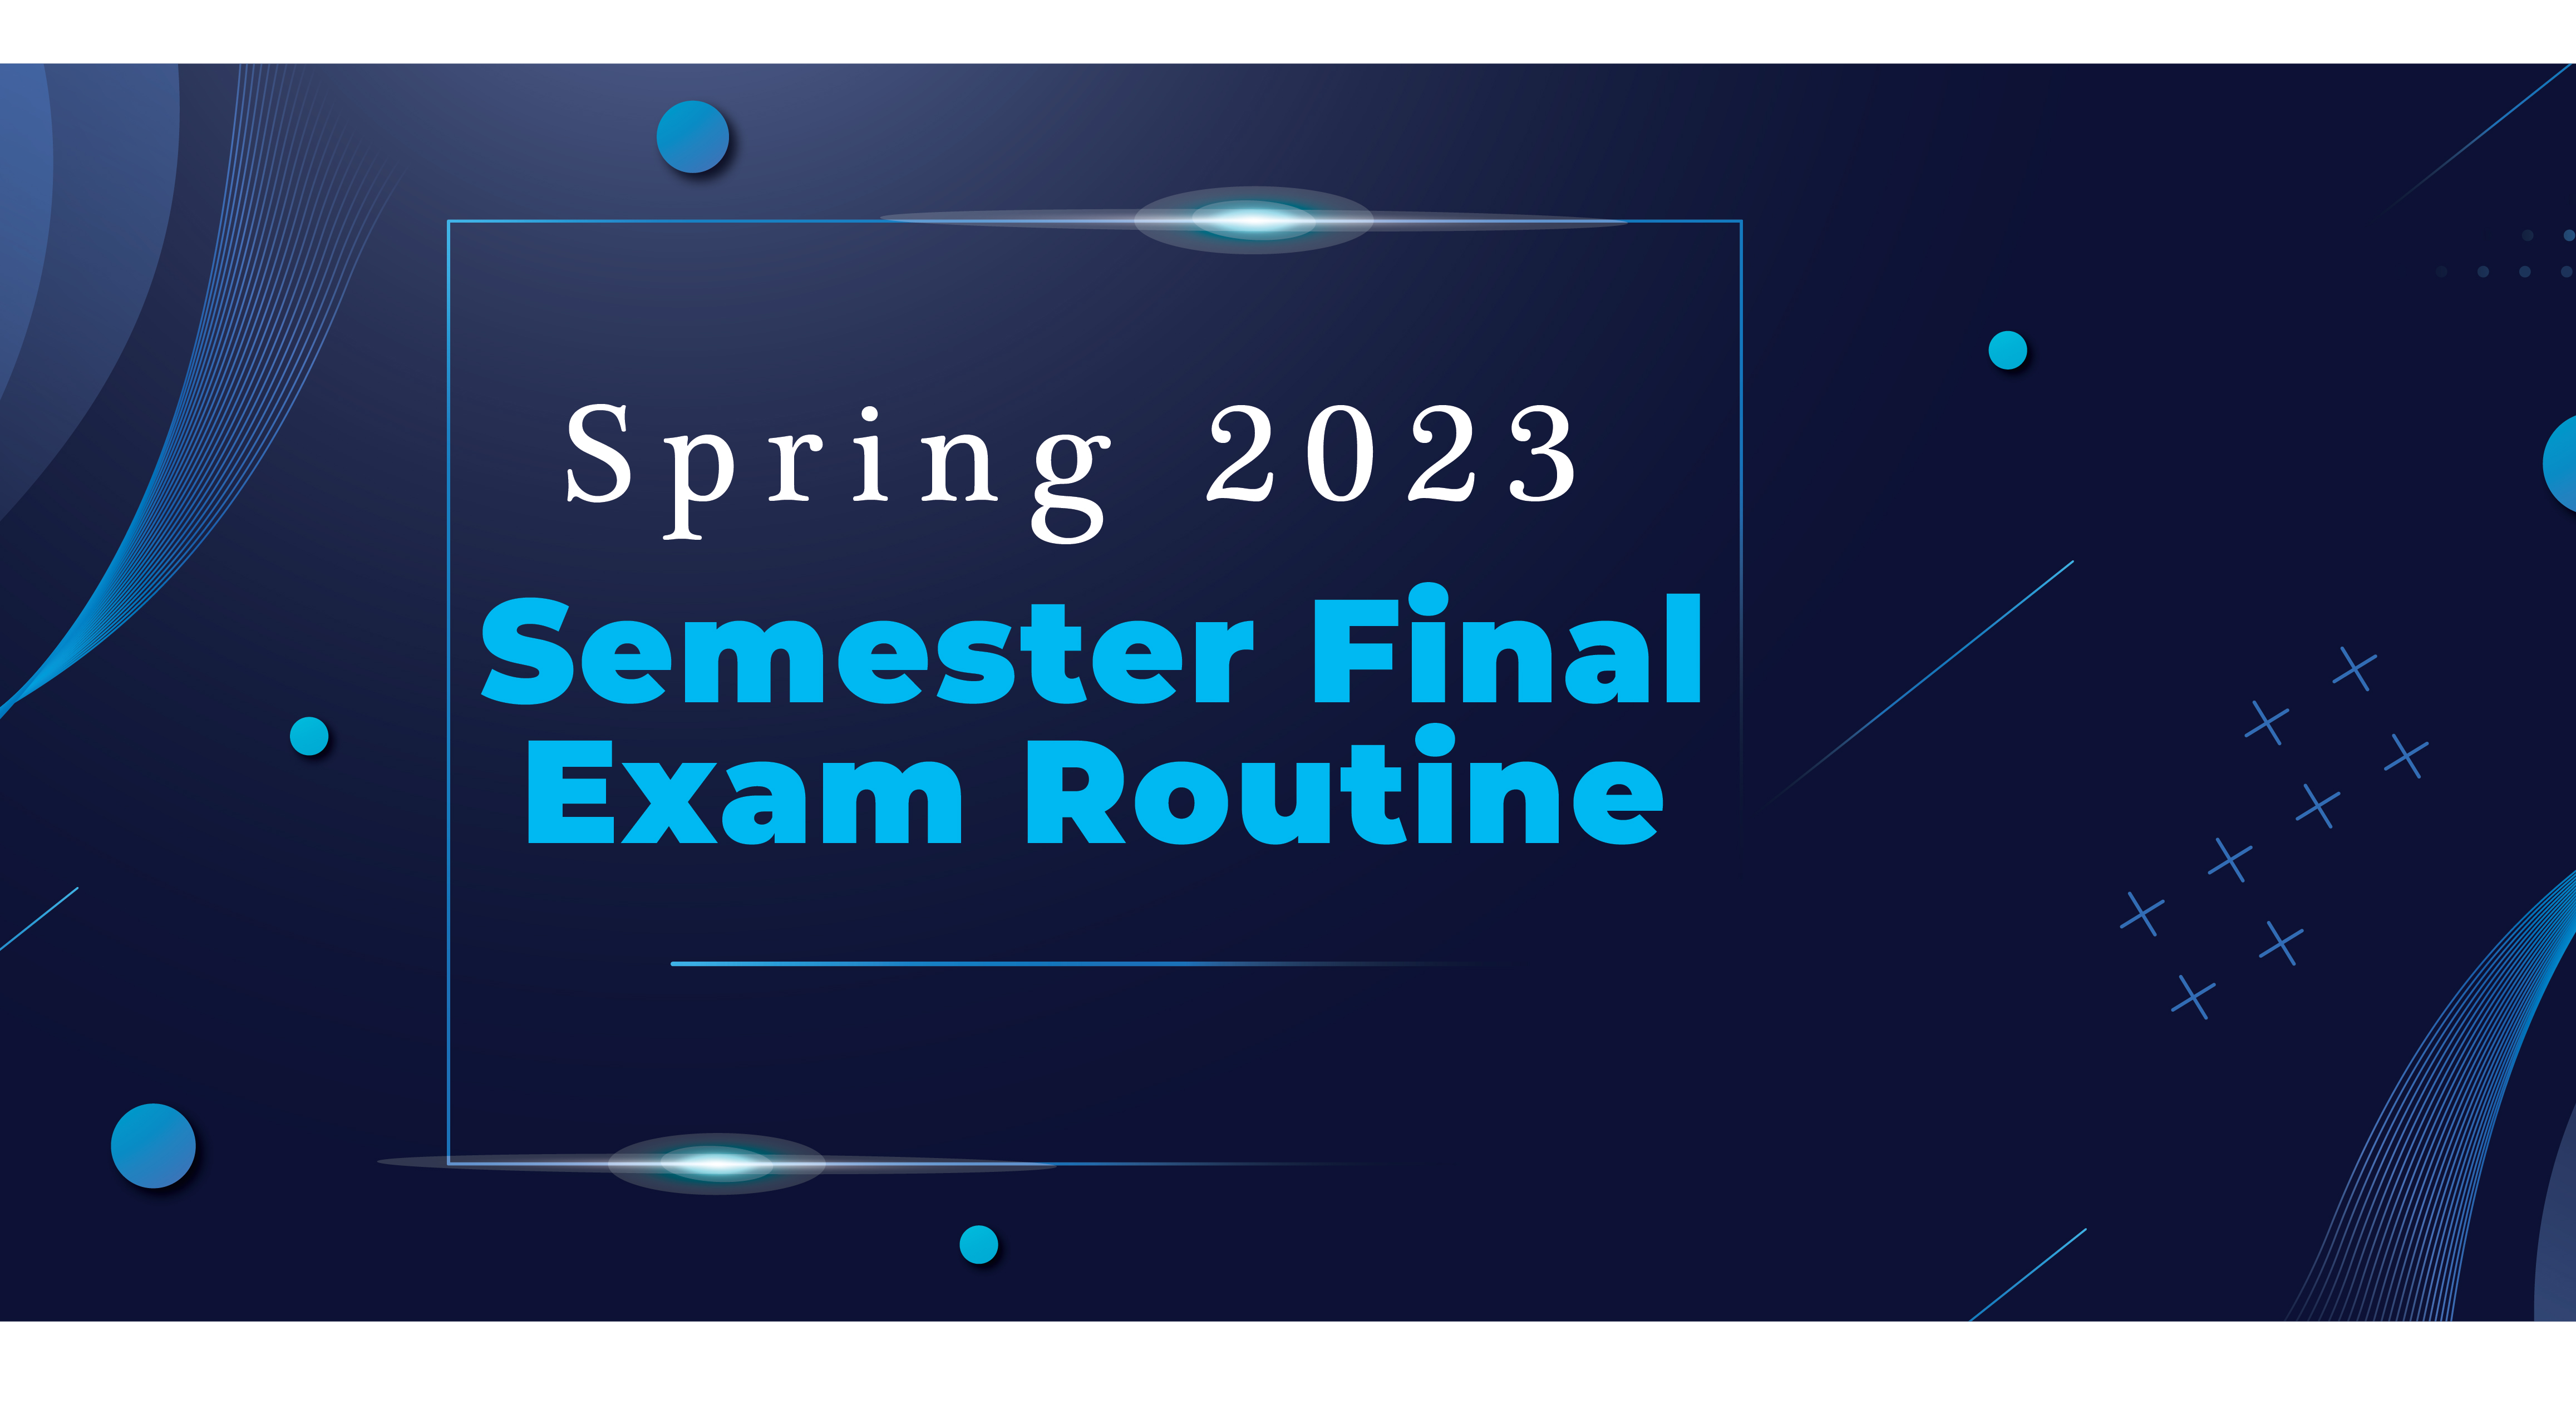 SPRING 2023 SEMESTER FINAL EXAM ROUTINE FOR BENGALI image